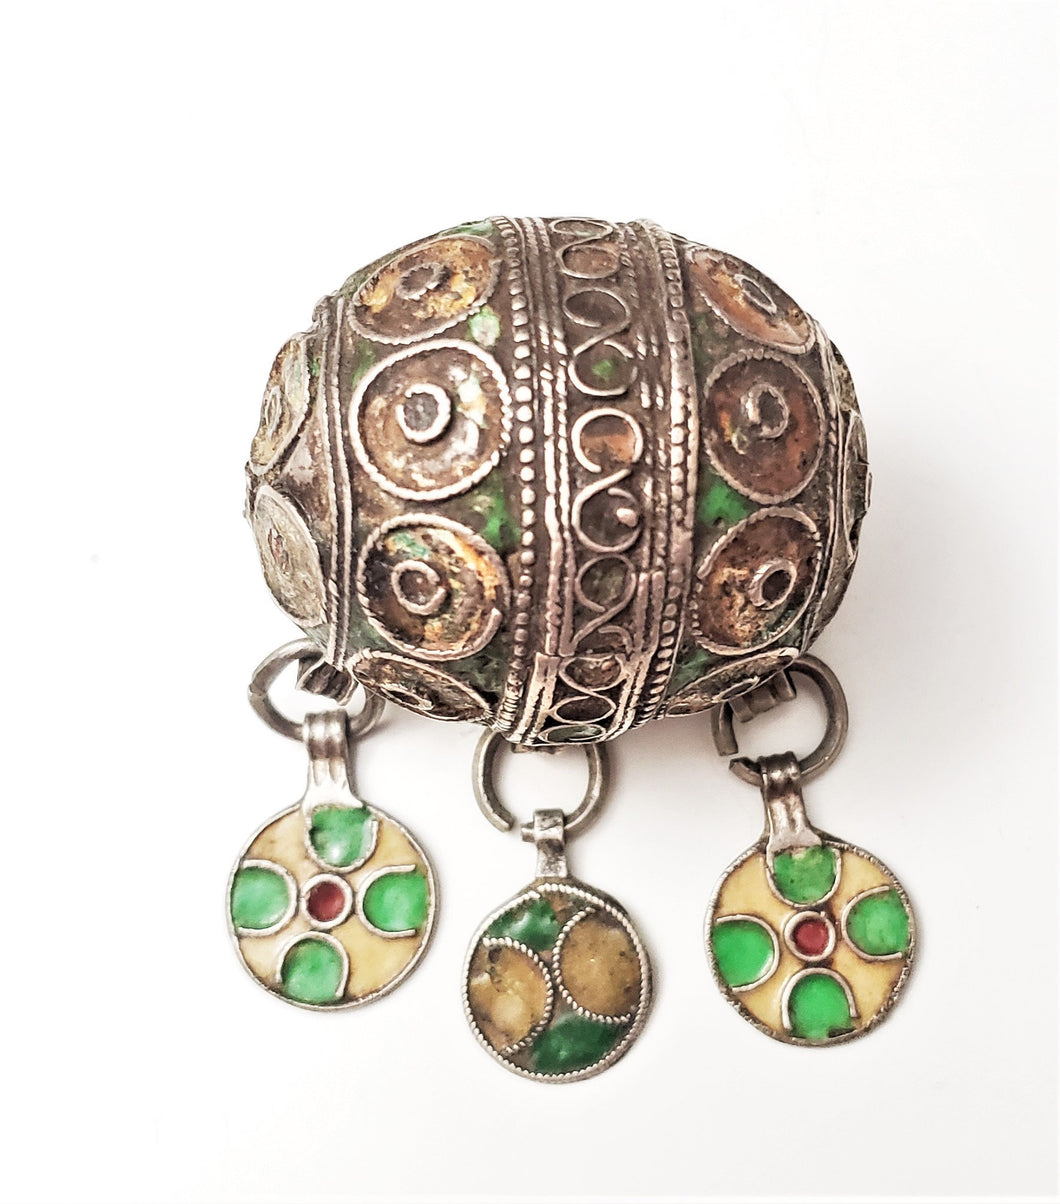 Antique Moroccan Enameled Silver Ball Pendent with Enameled/PendantHand Crafted Silver,Pendants Necklace,Ethnic Jewelry,Tribal Jewelry